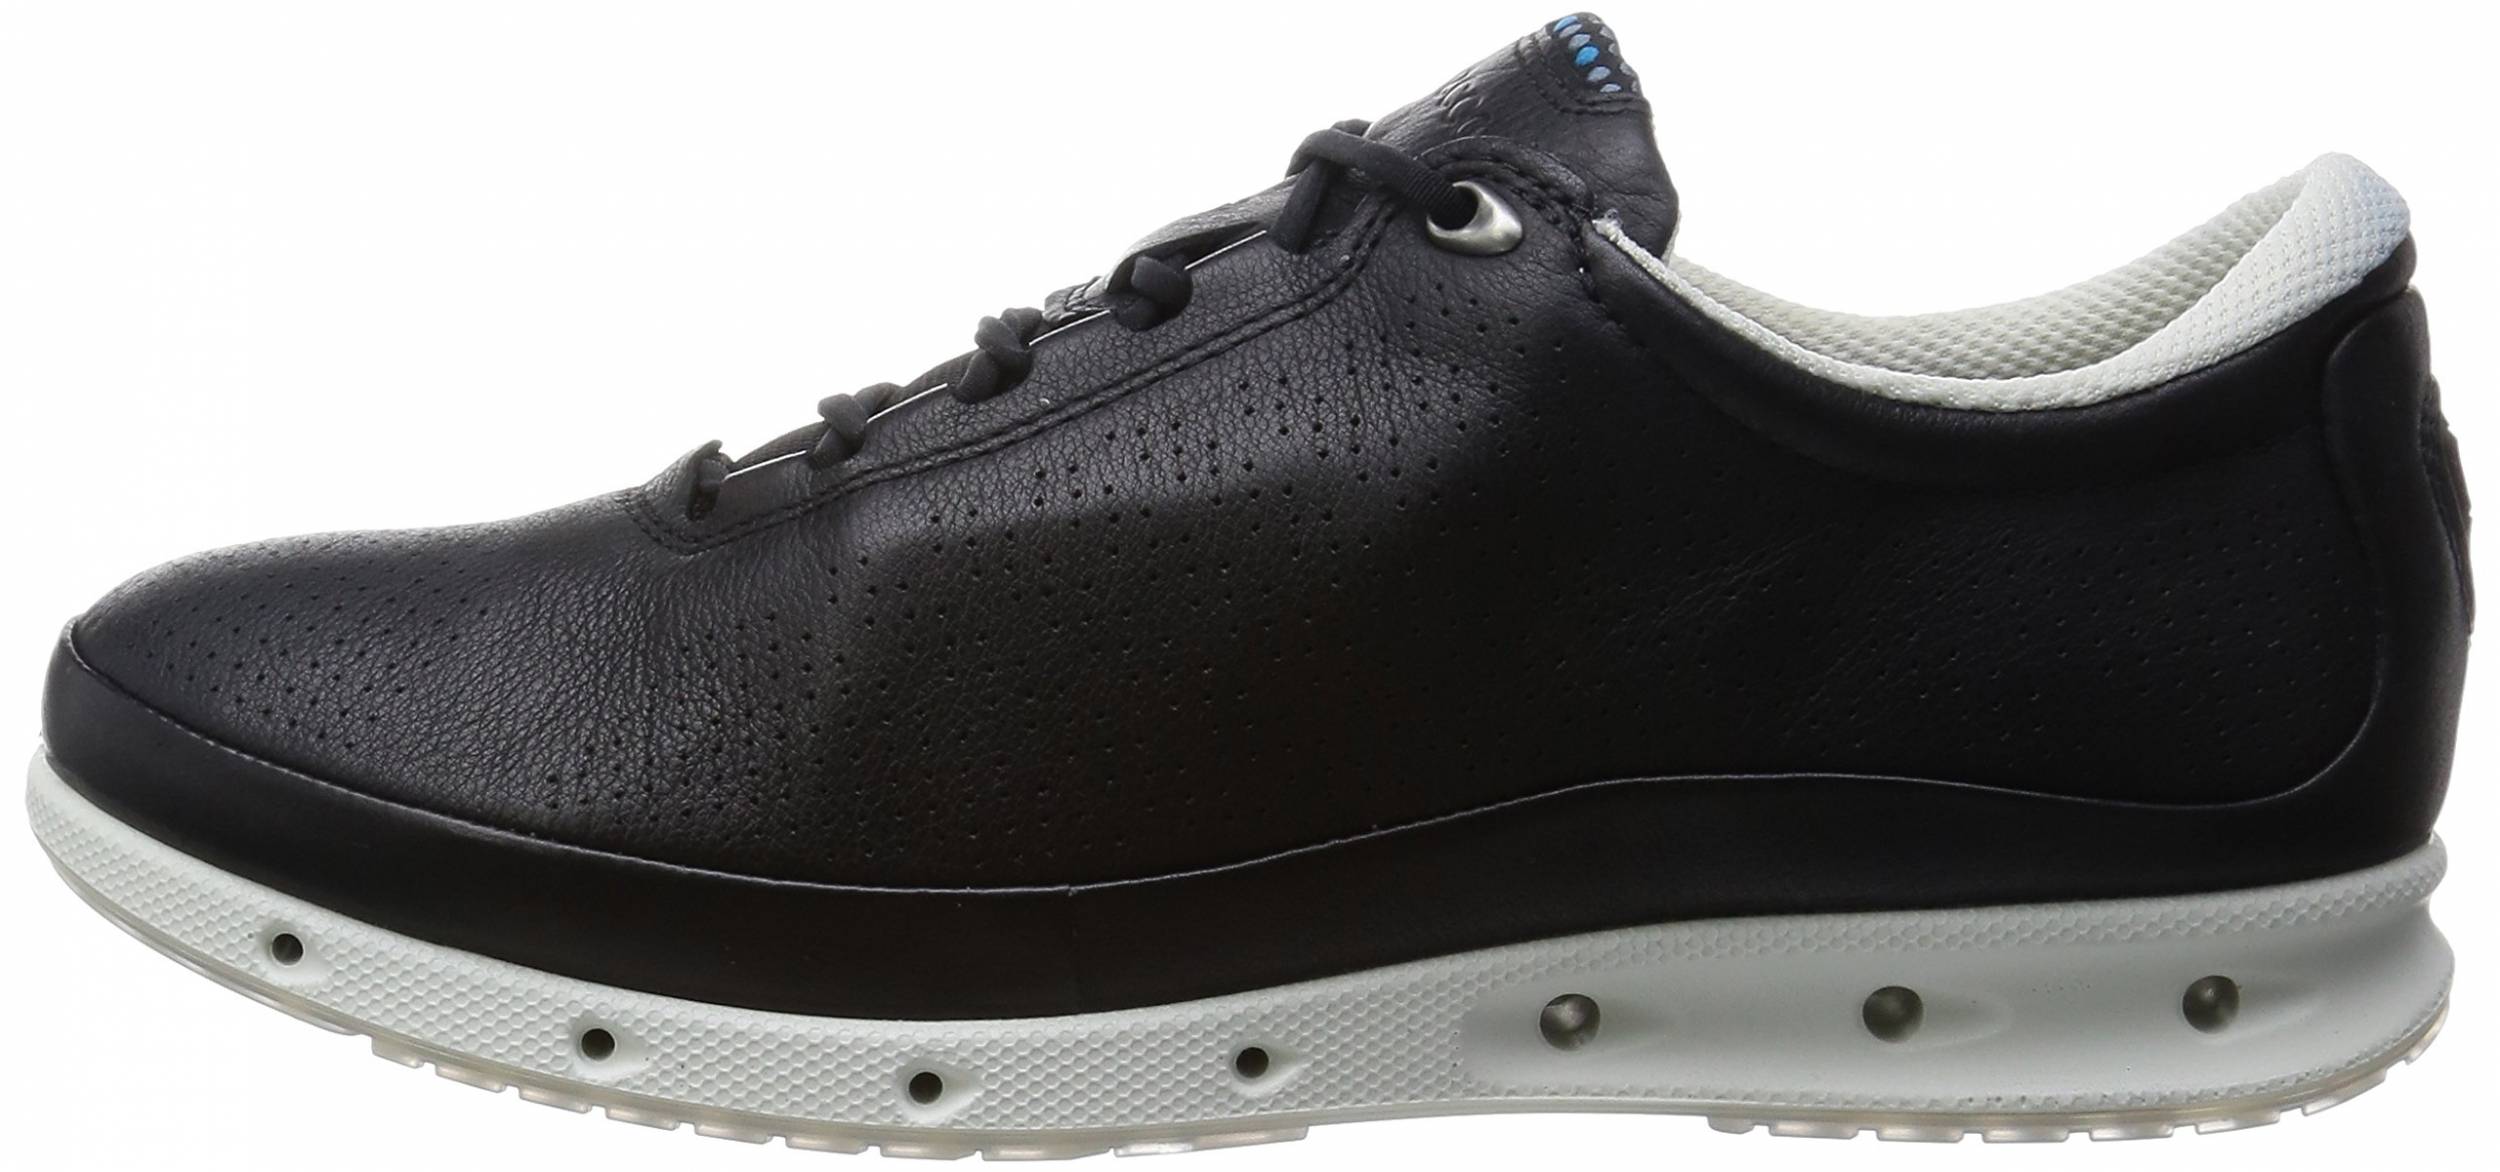 Ecco Cool GTX sneakers (only $97) | RunRepeat